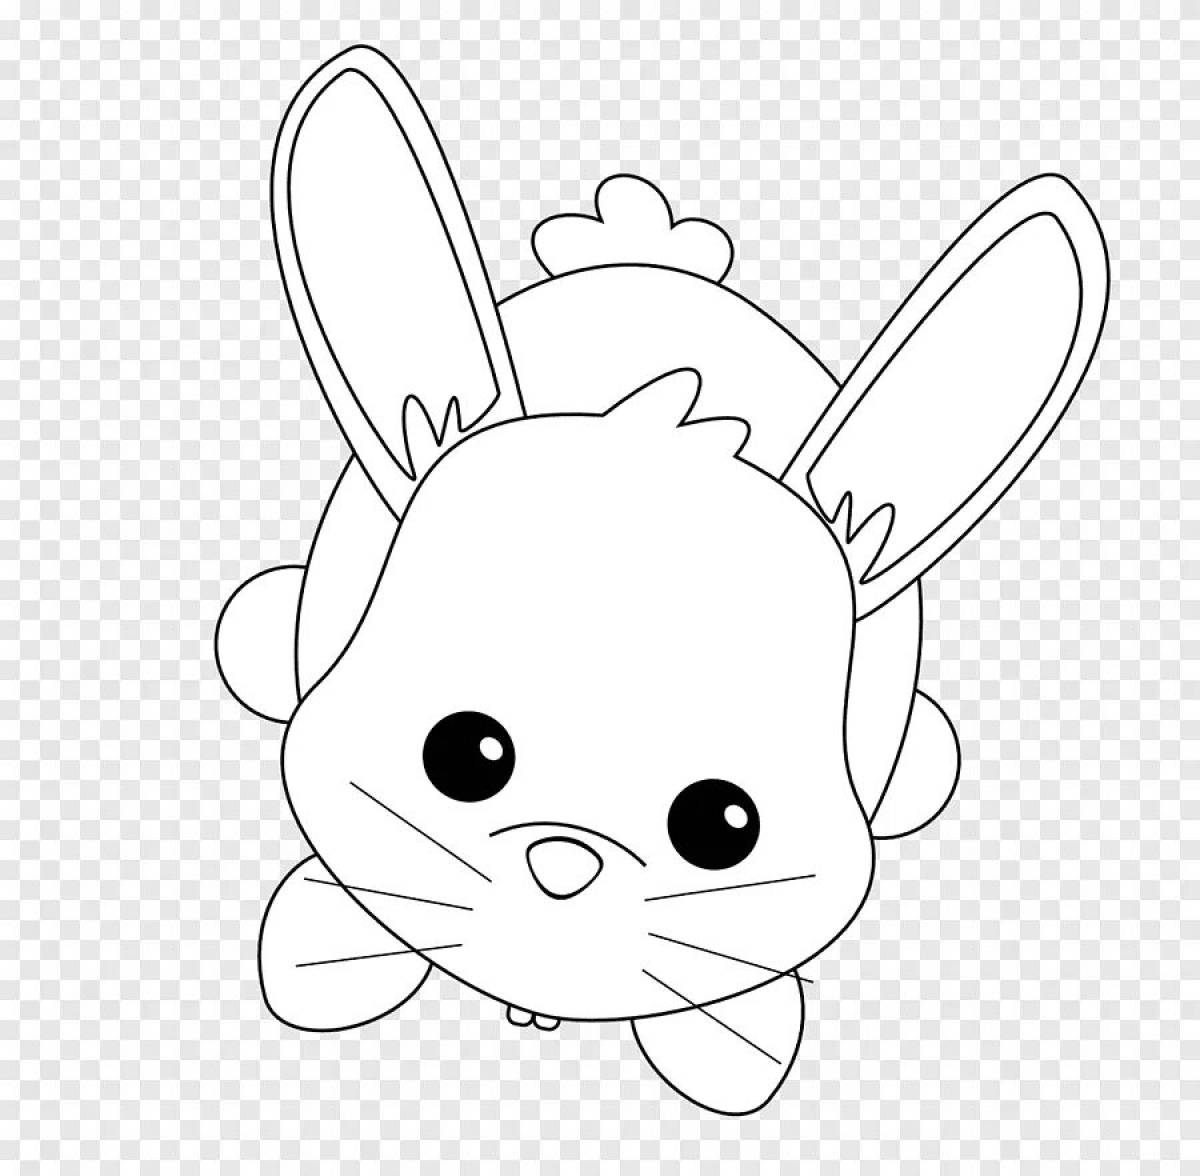 Coloring glossy rabbit and cat